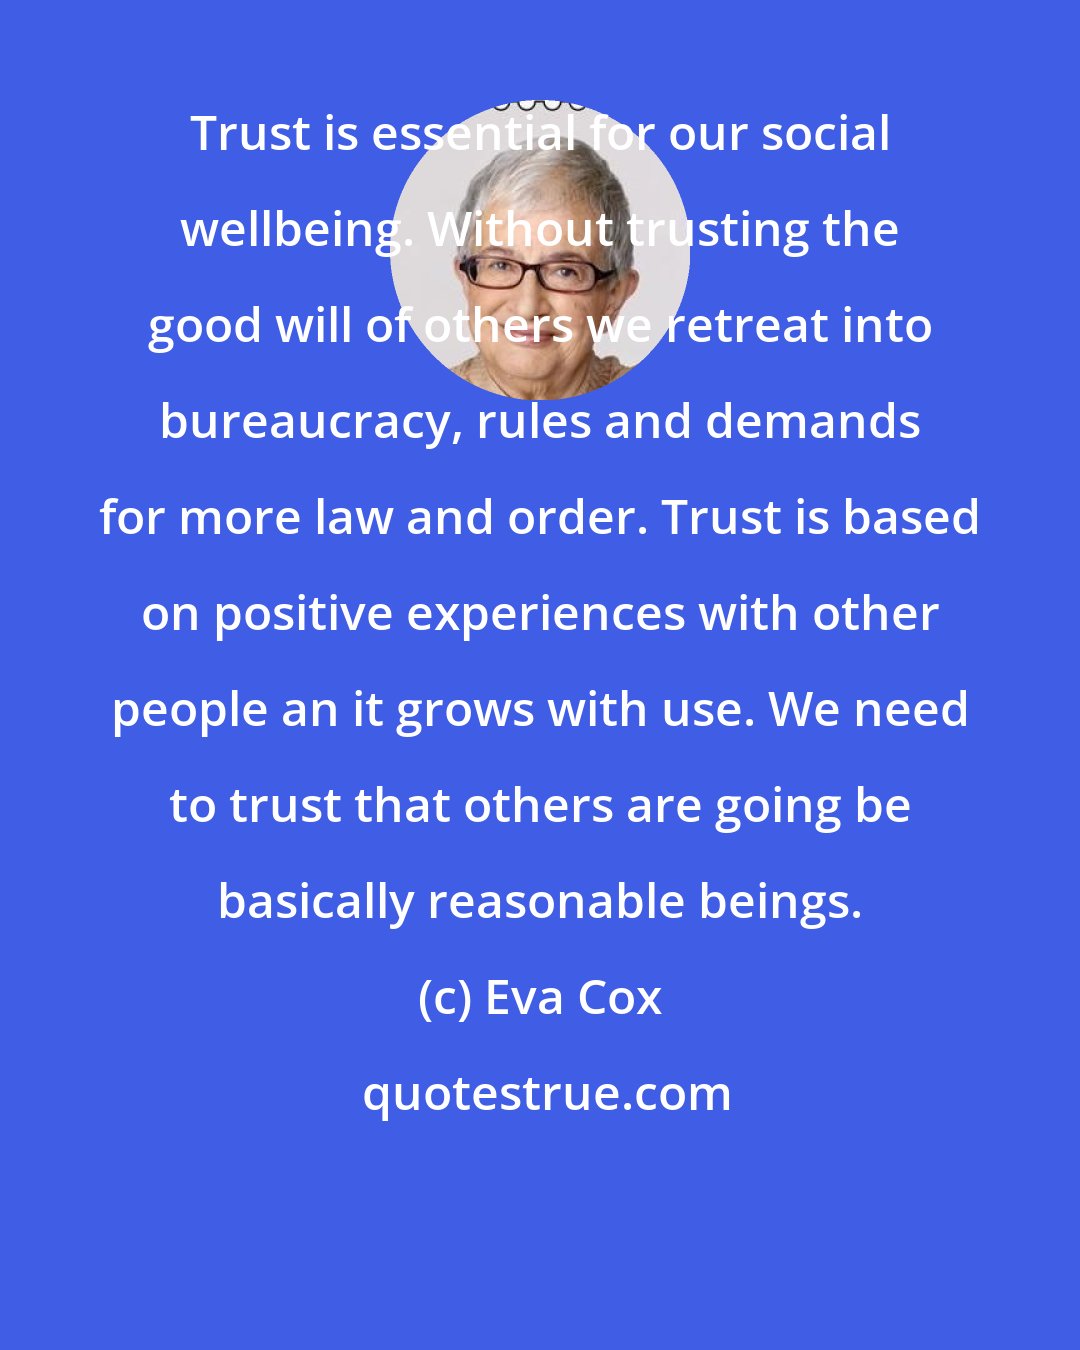 Eva Cox: Trust is essential for our social wellbeing. Without trusting the good will of others we retreat into bureaucracy, rules and demands for more law and order. Trust is based on positive experiences with other people an it grows with use. We need to trust that others are going be basically reasonable beings.